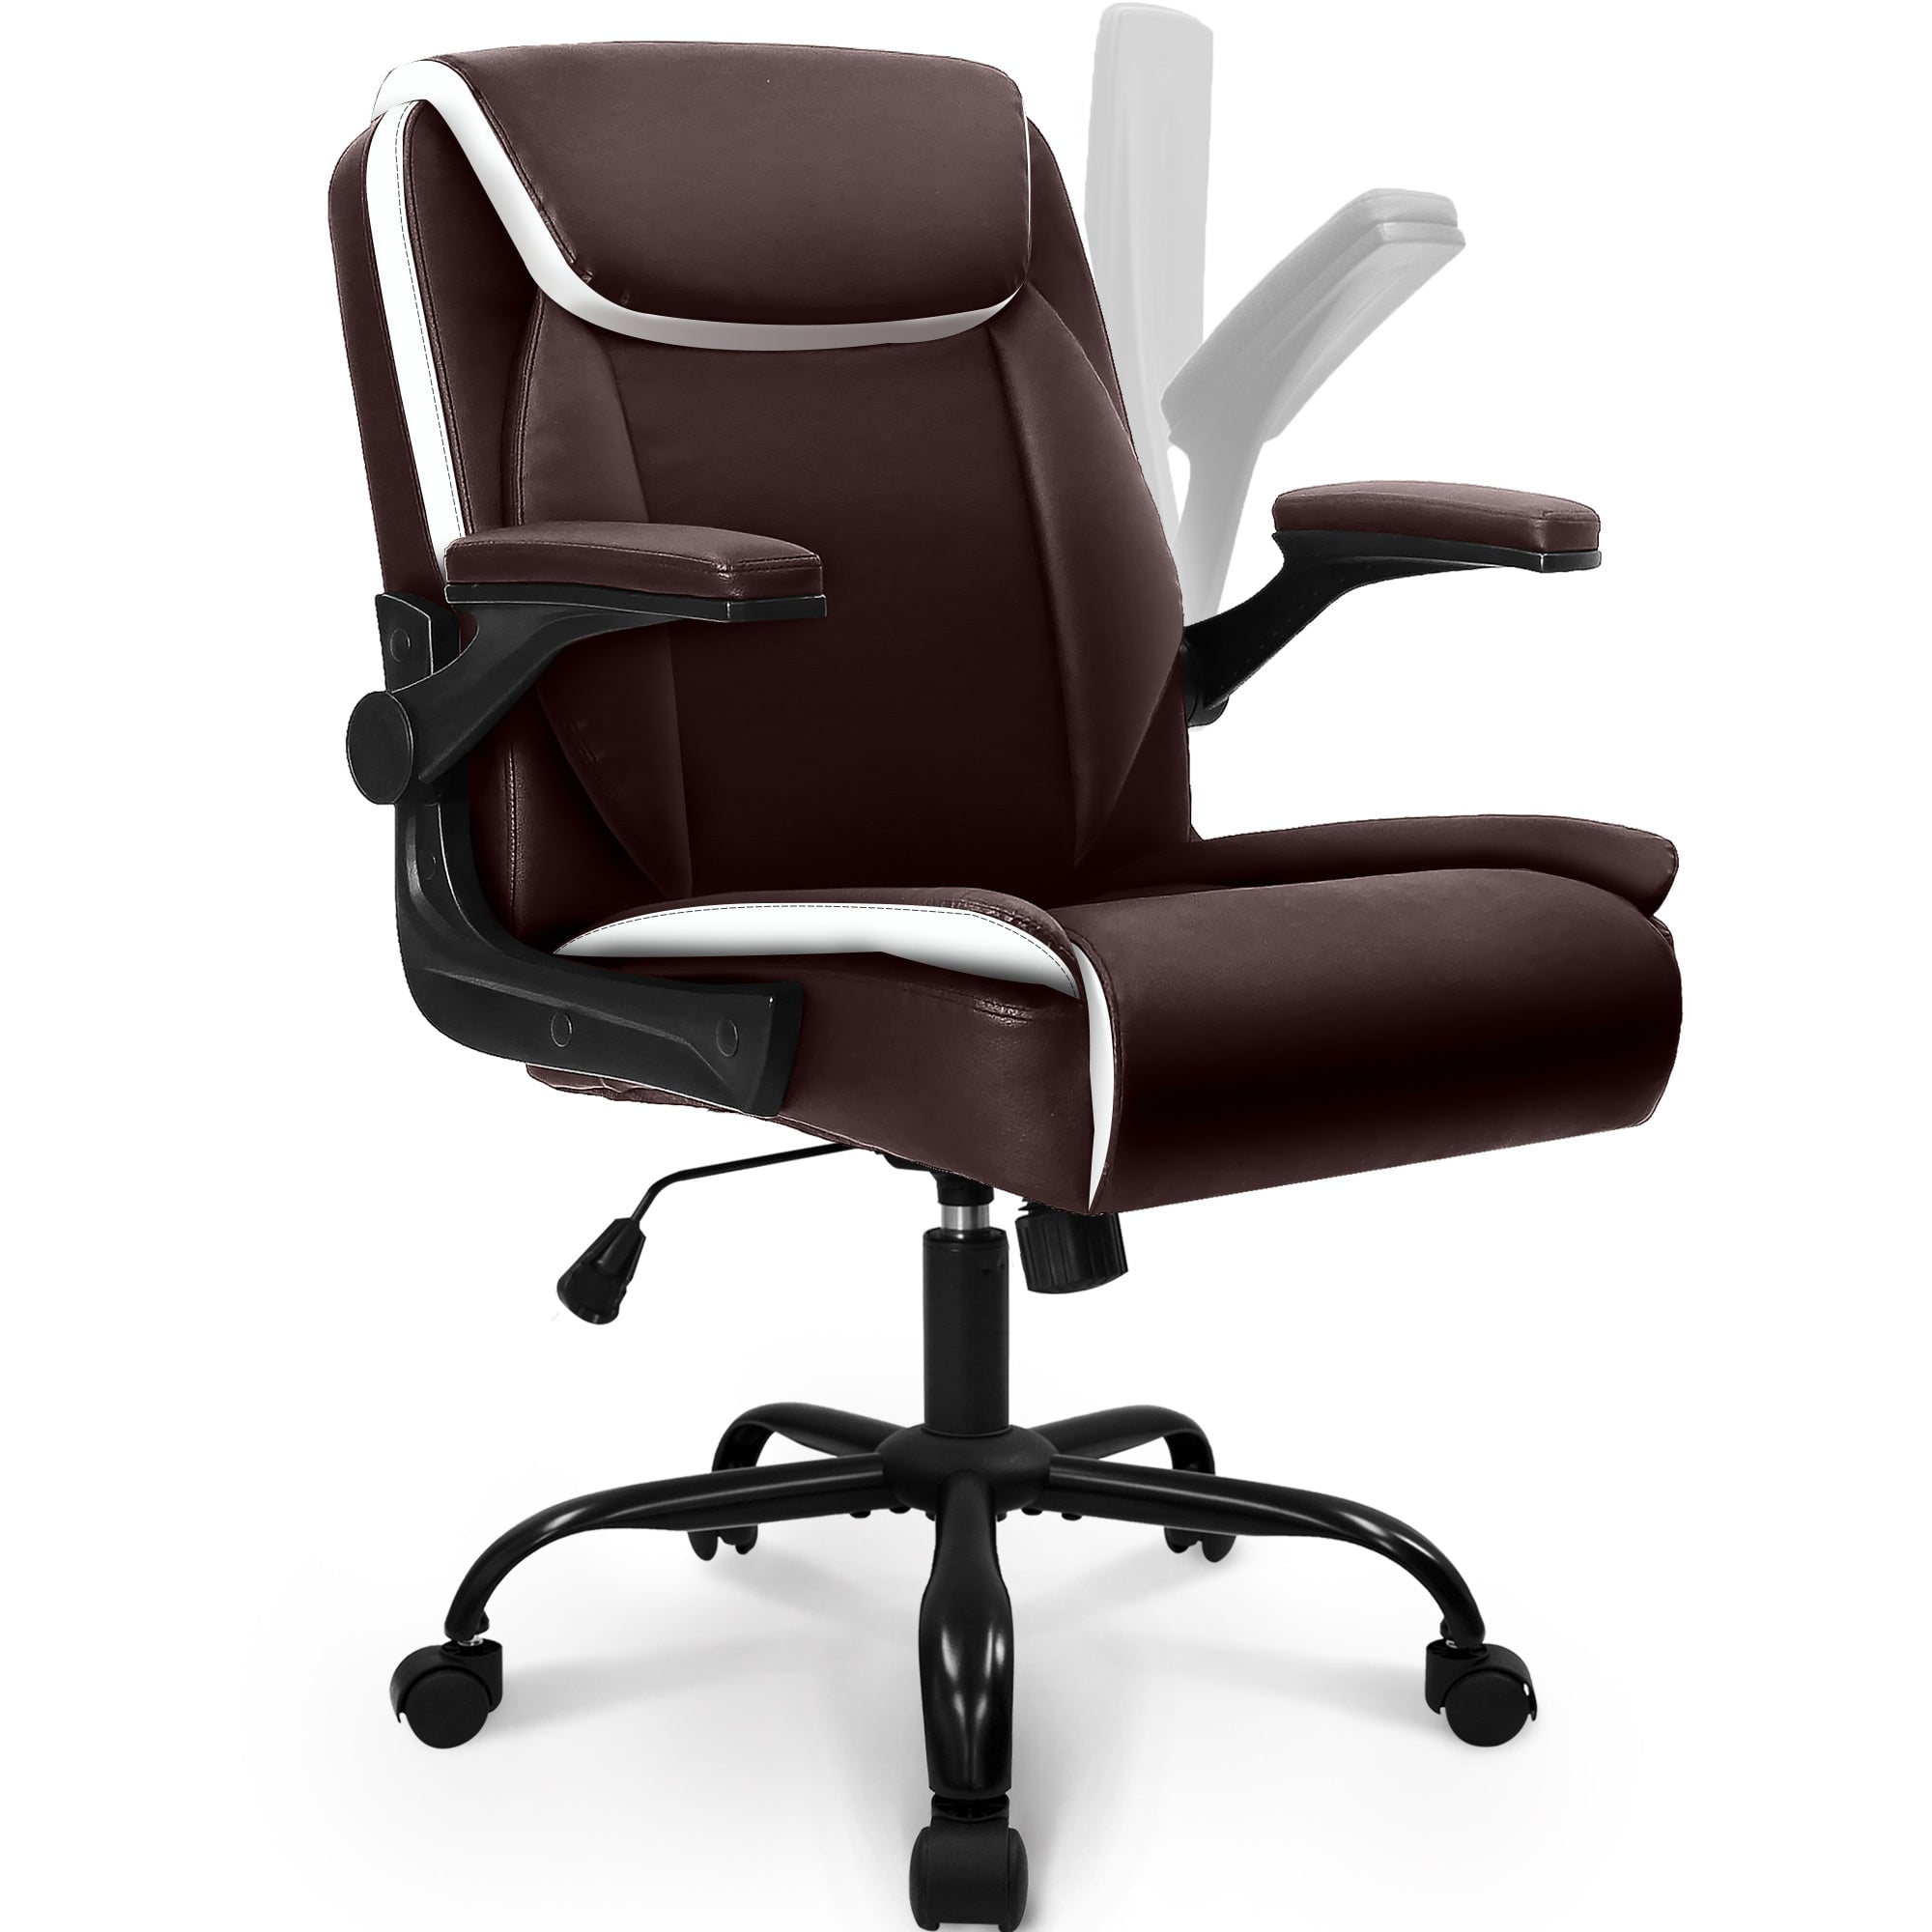 NEO CHAIR Ergonomic Office Chair PU Leather Executive Chair Padded